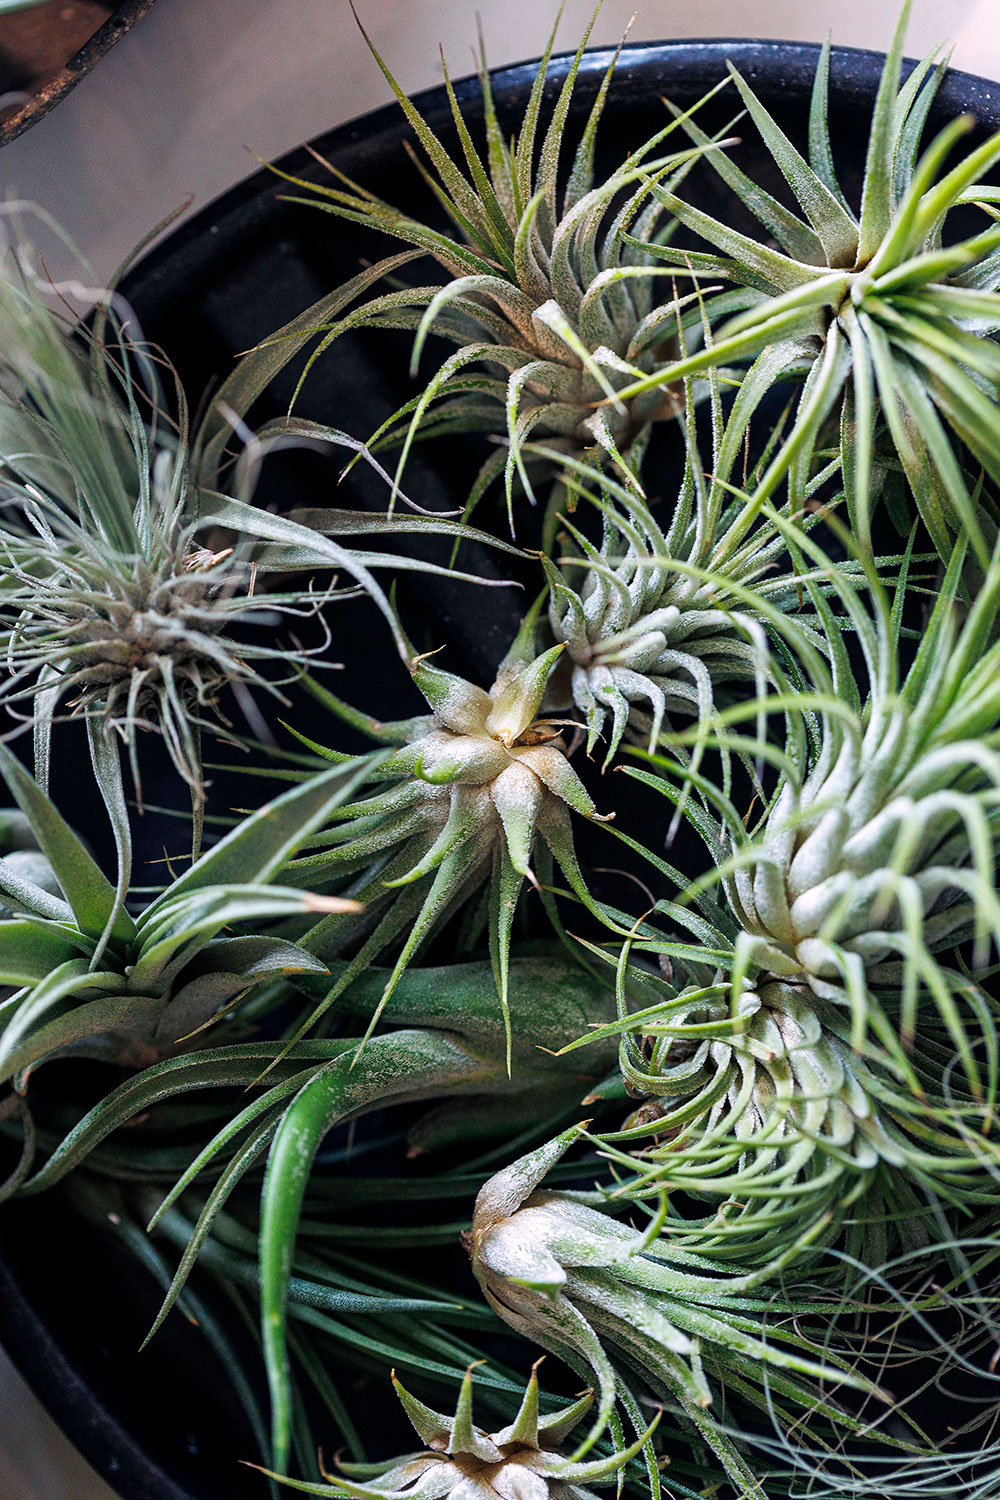 In addition to succulents, the store sells air plants.